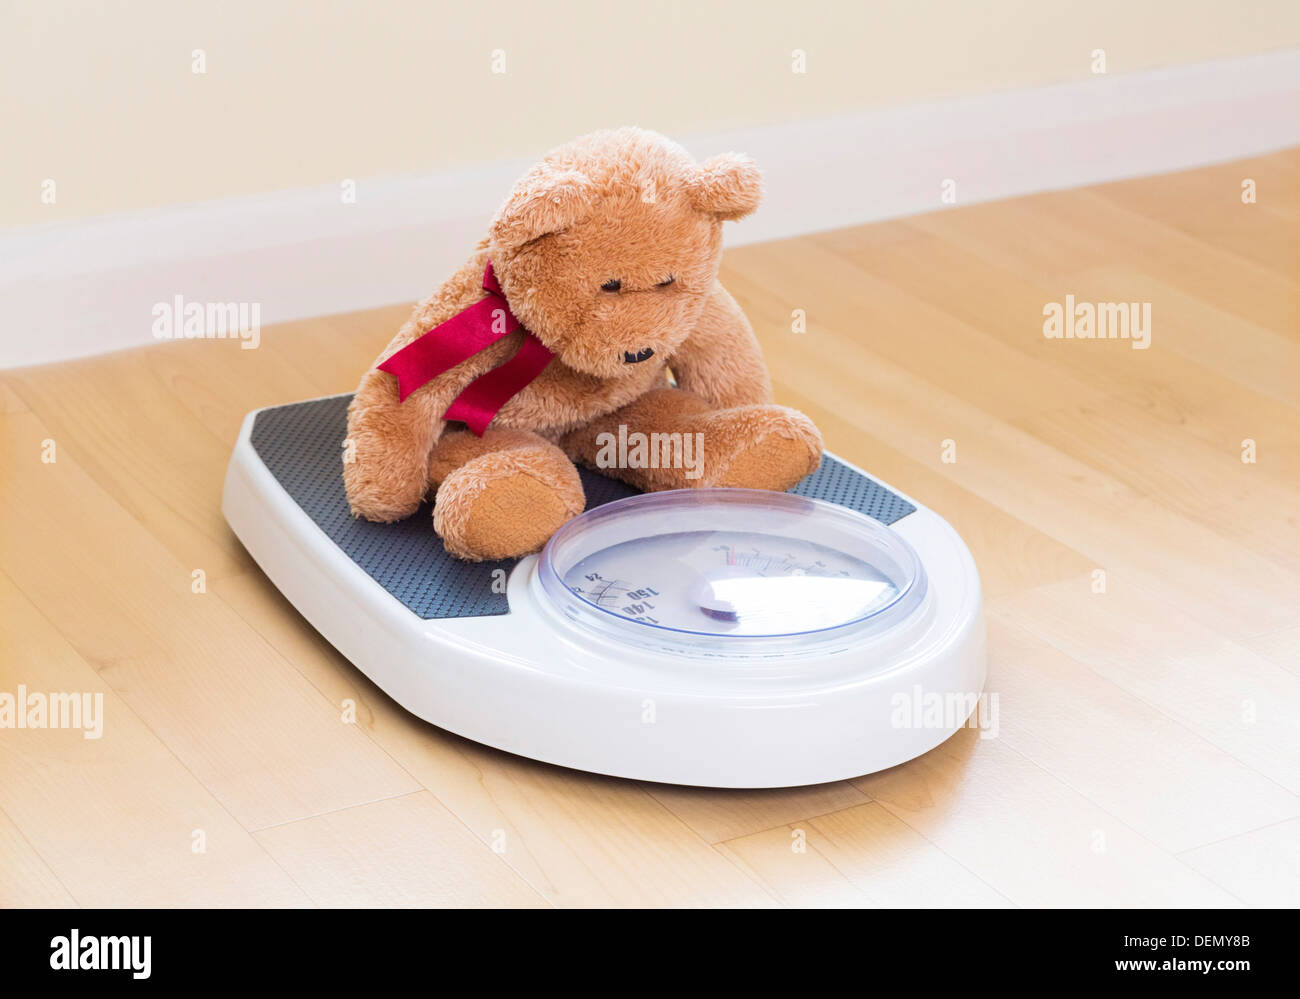 teddy bear on weighing scales Stock Photo